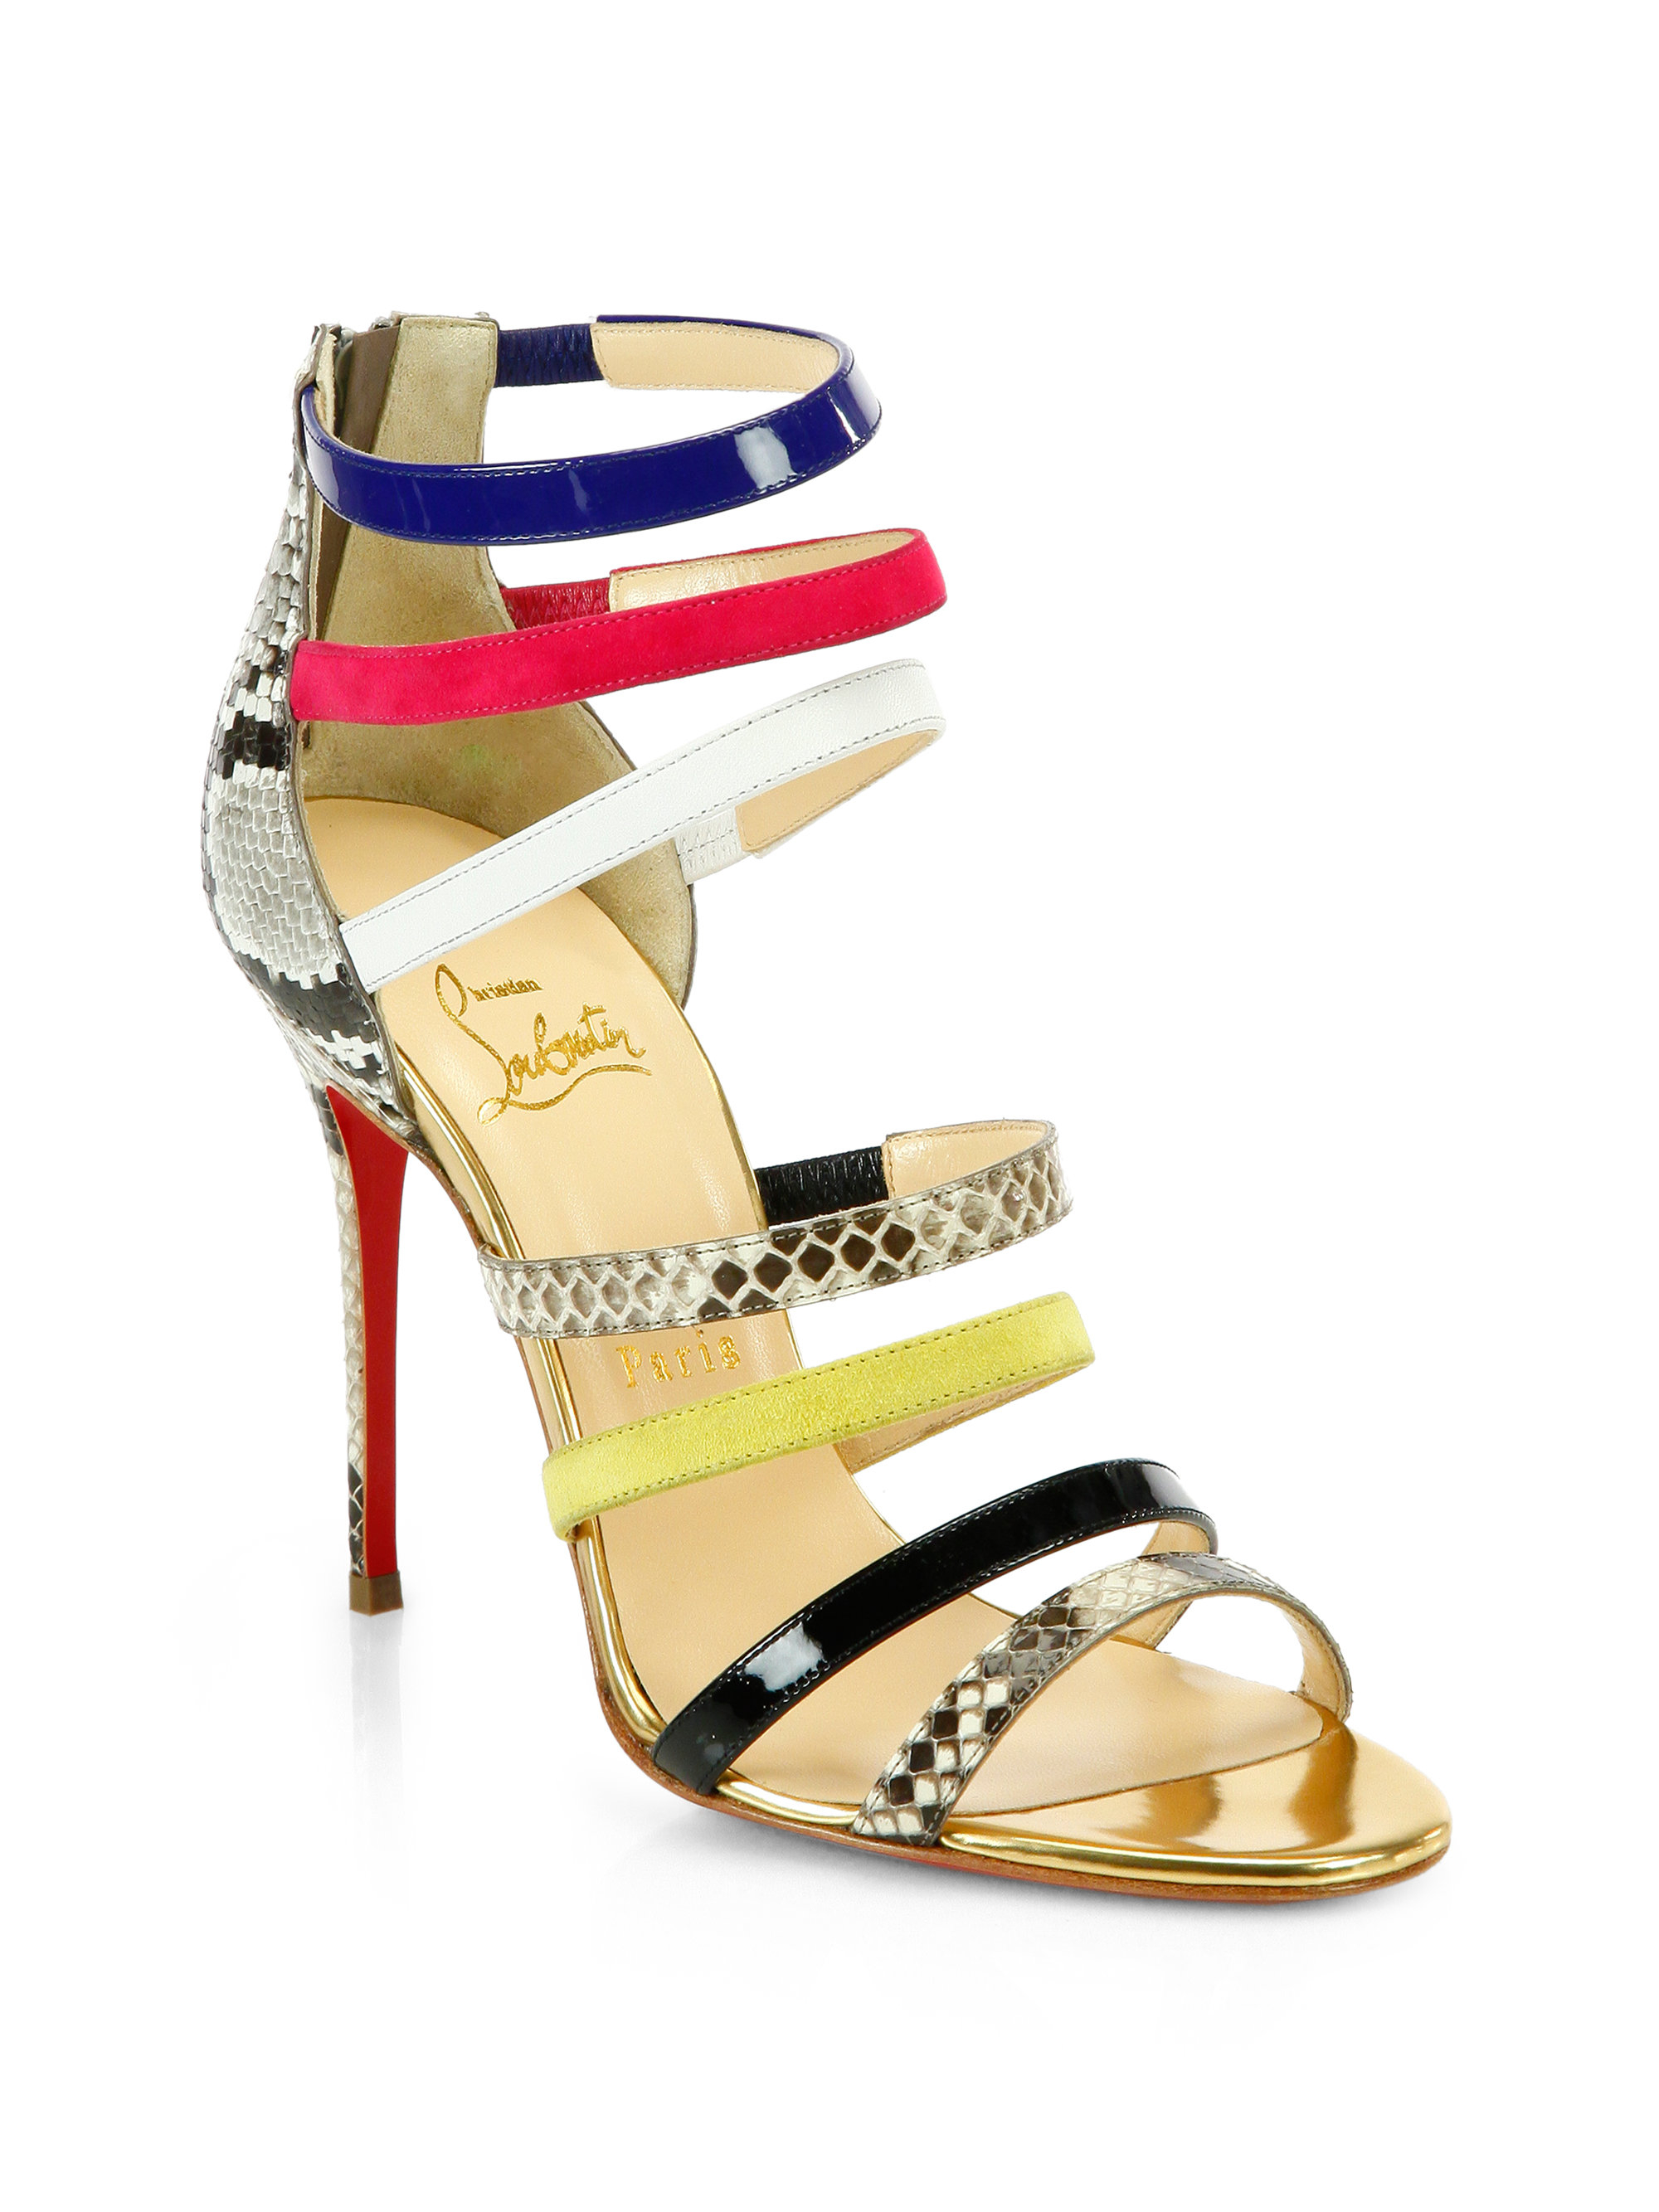 christian louboutin men online store - Christian louboutin Marniere Strappy Python Sandals in Multicolor ...